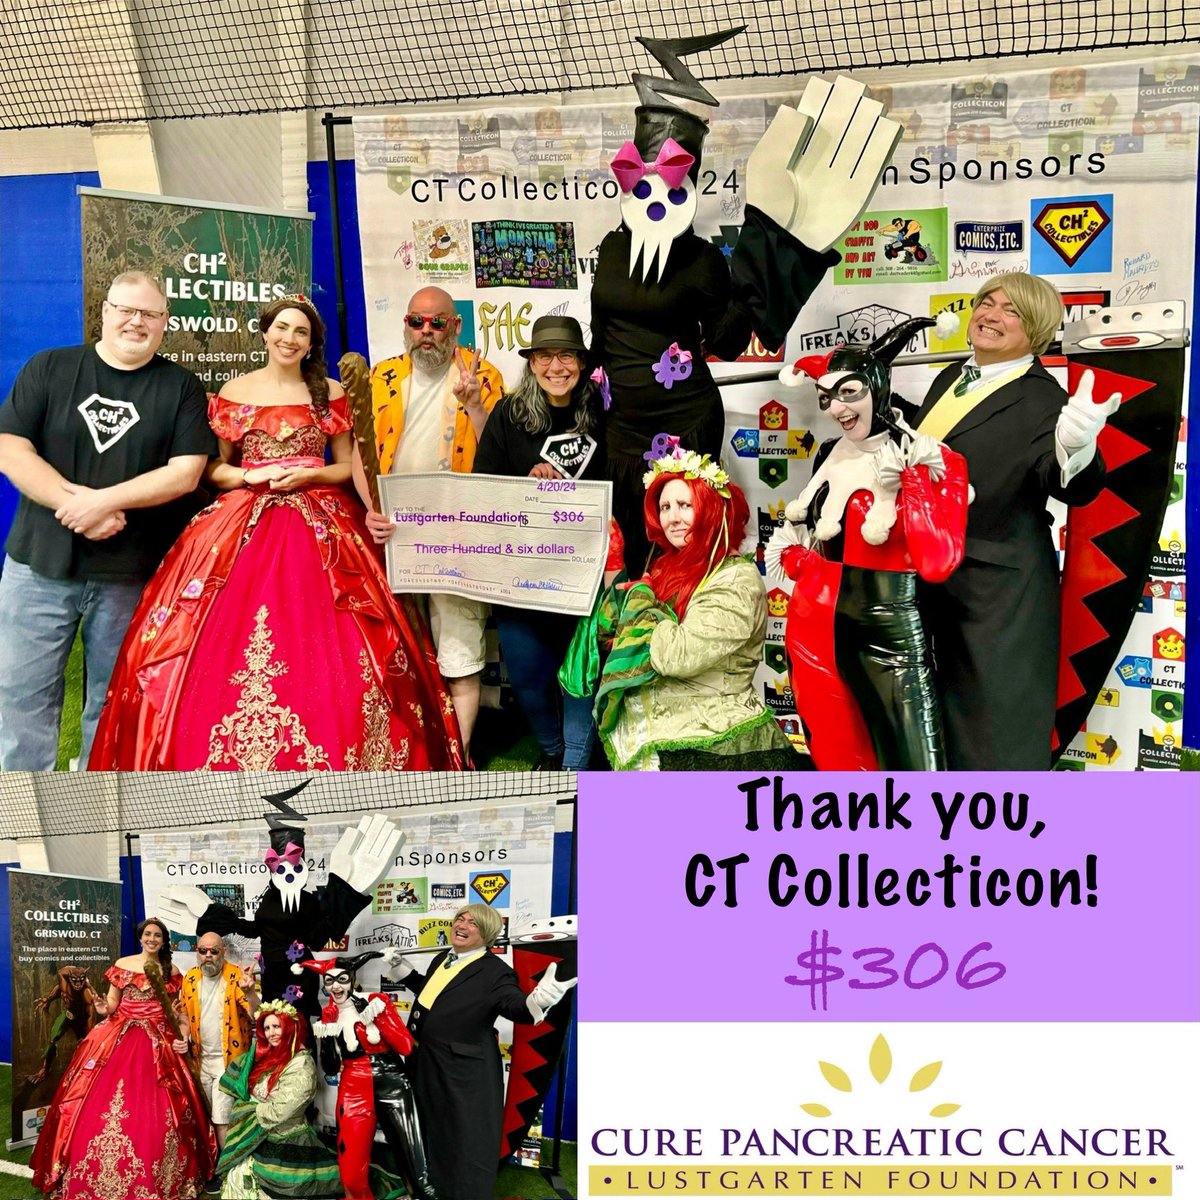 Thanks to
CT Collecticon, we raised $306 today for @lustgartenfdn at the show in Montville, CT!  We’re now over 39K for pancreatic cancer research since 07/2022.  See you on 7/27. @somegoodnews @dosomething @Carley_Winn @Upworthy @Upworthy @SU2C @BuzzFeed @IGN #ct #connecticut